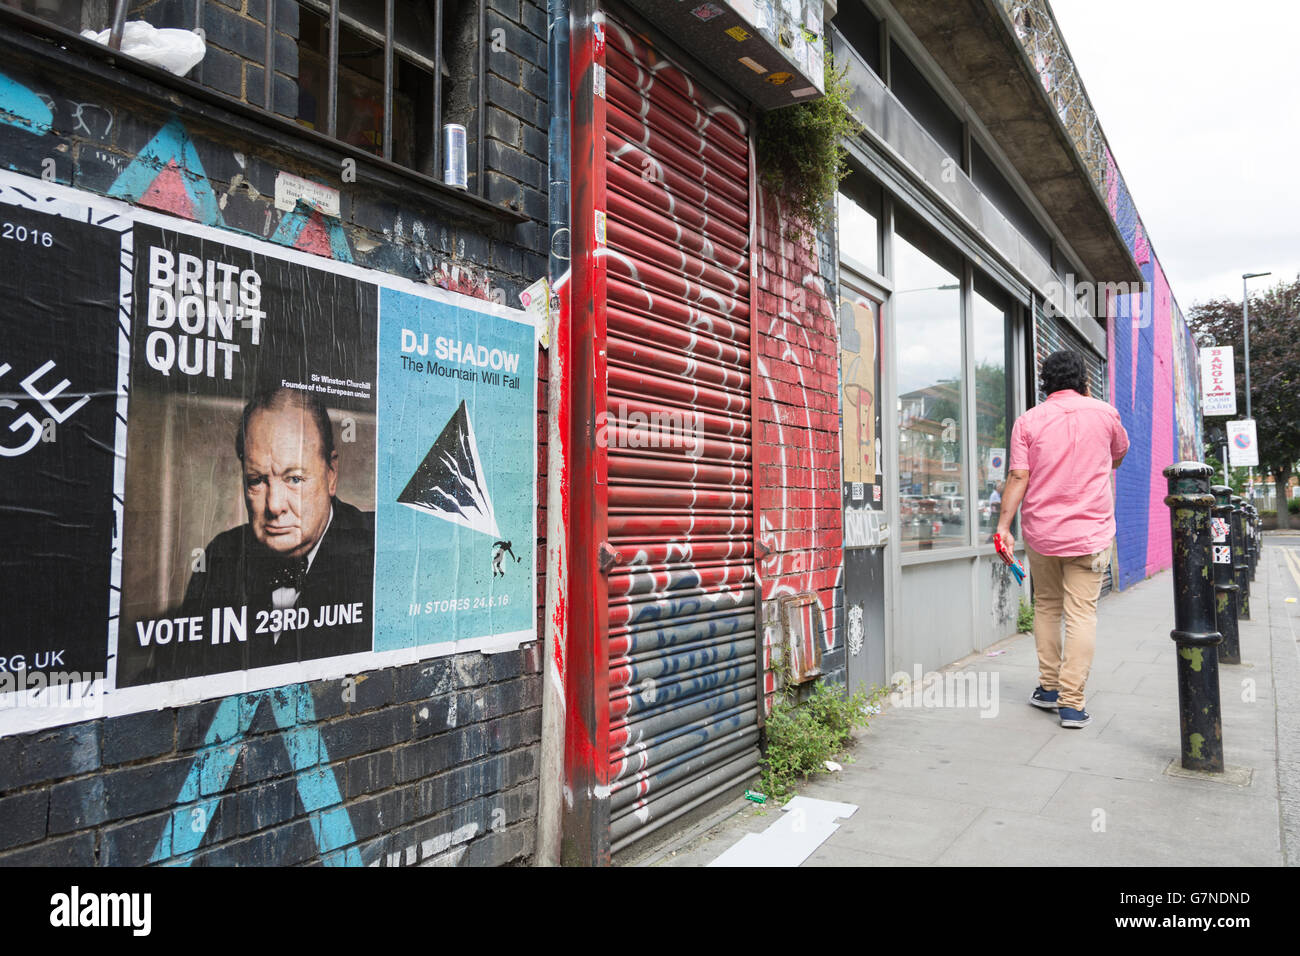 Brits Don't Quit election poster and graffiti in Spitalfields in London's East End Stock Photo